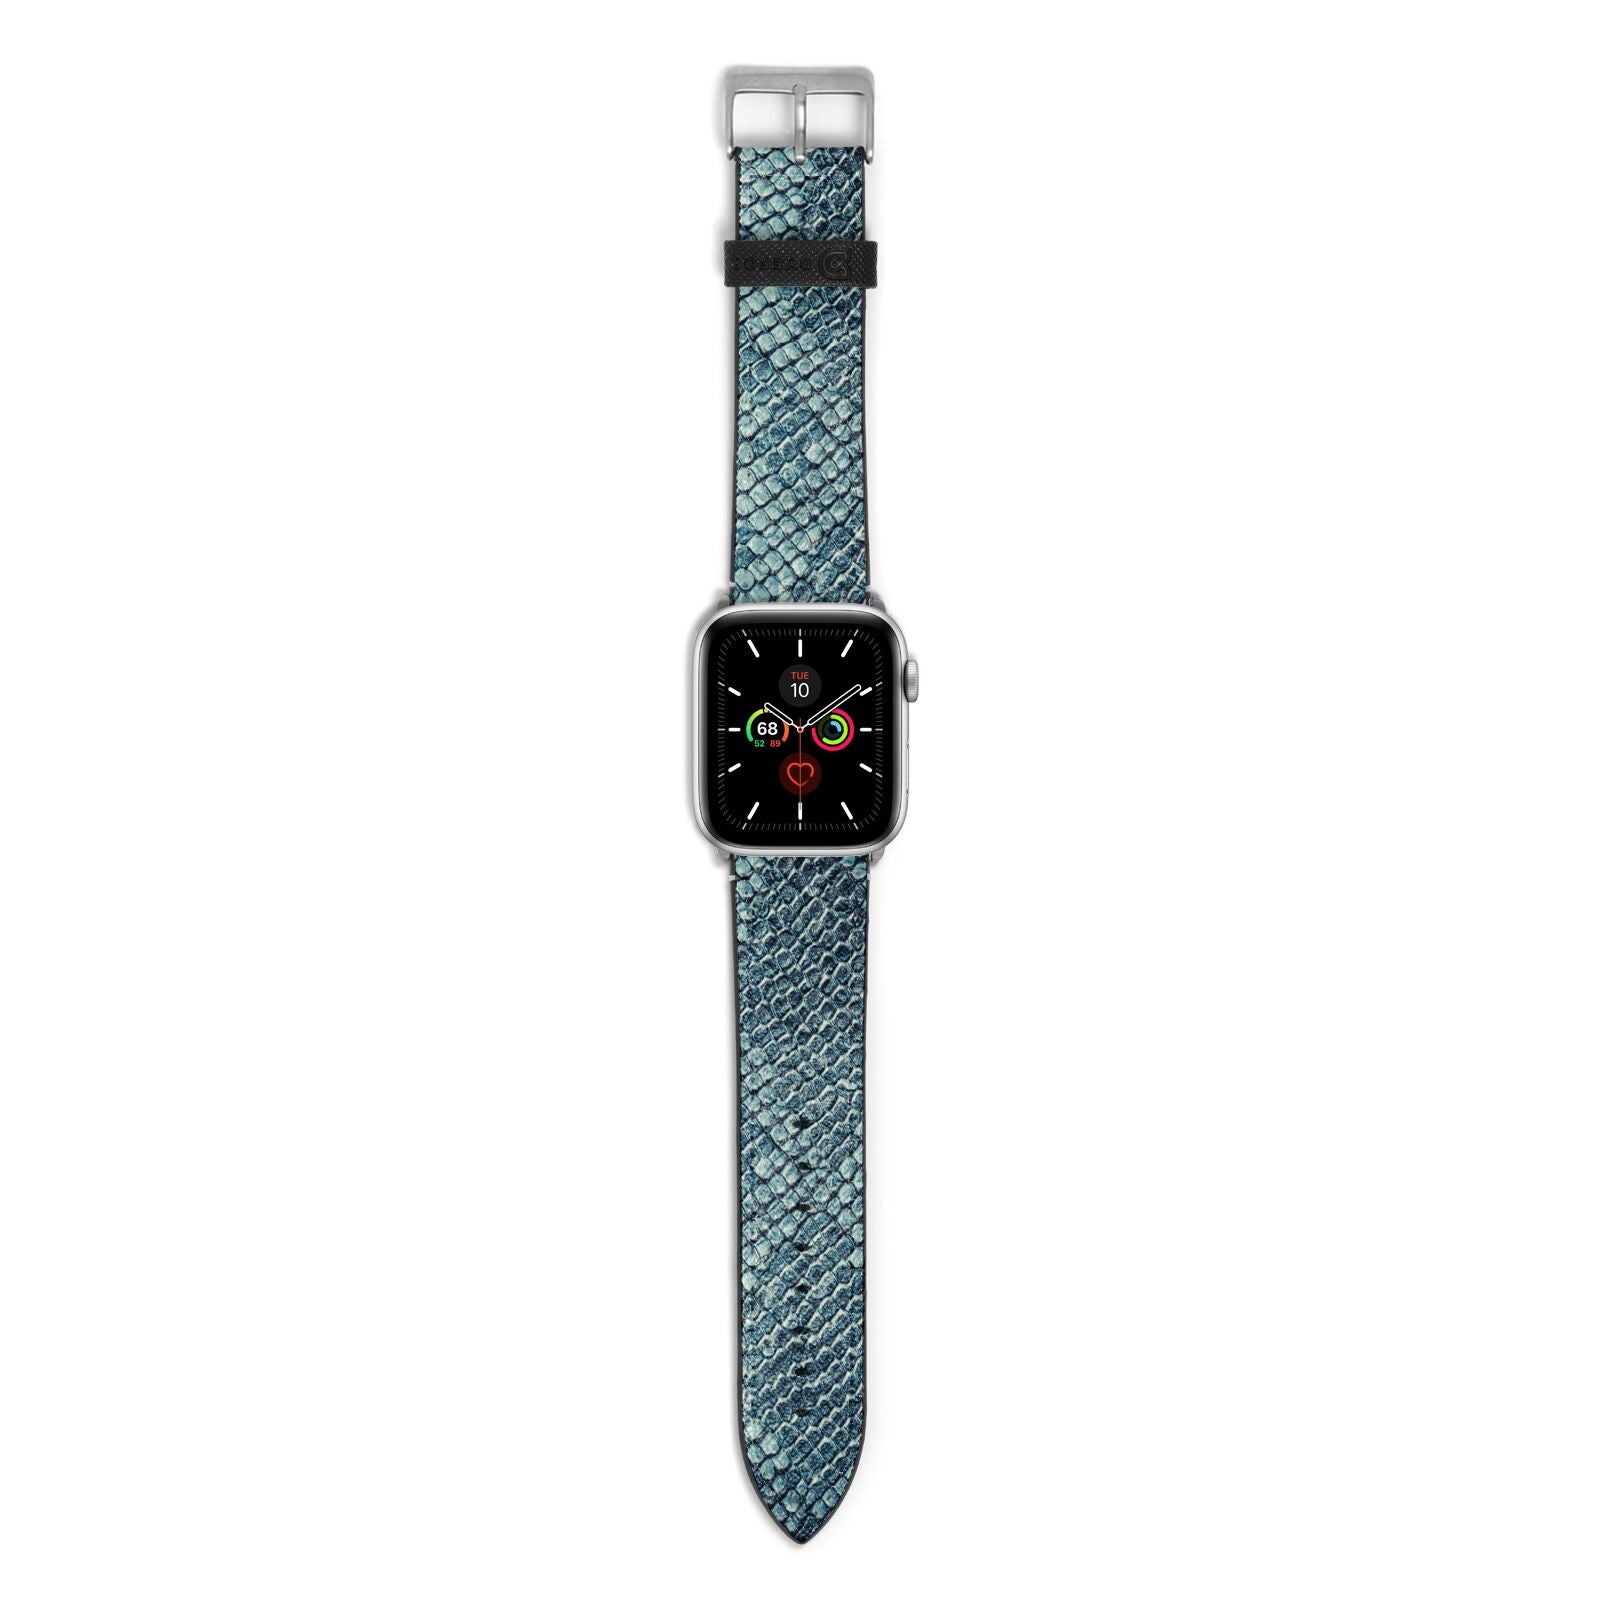 Teal Snakeskin Apple Watch Strap with Silver Hardware